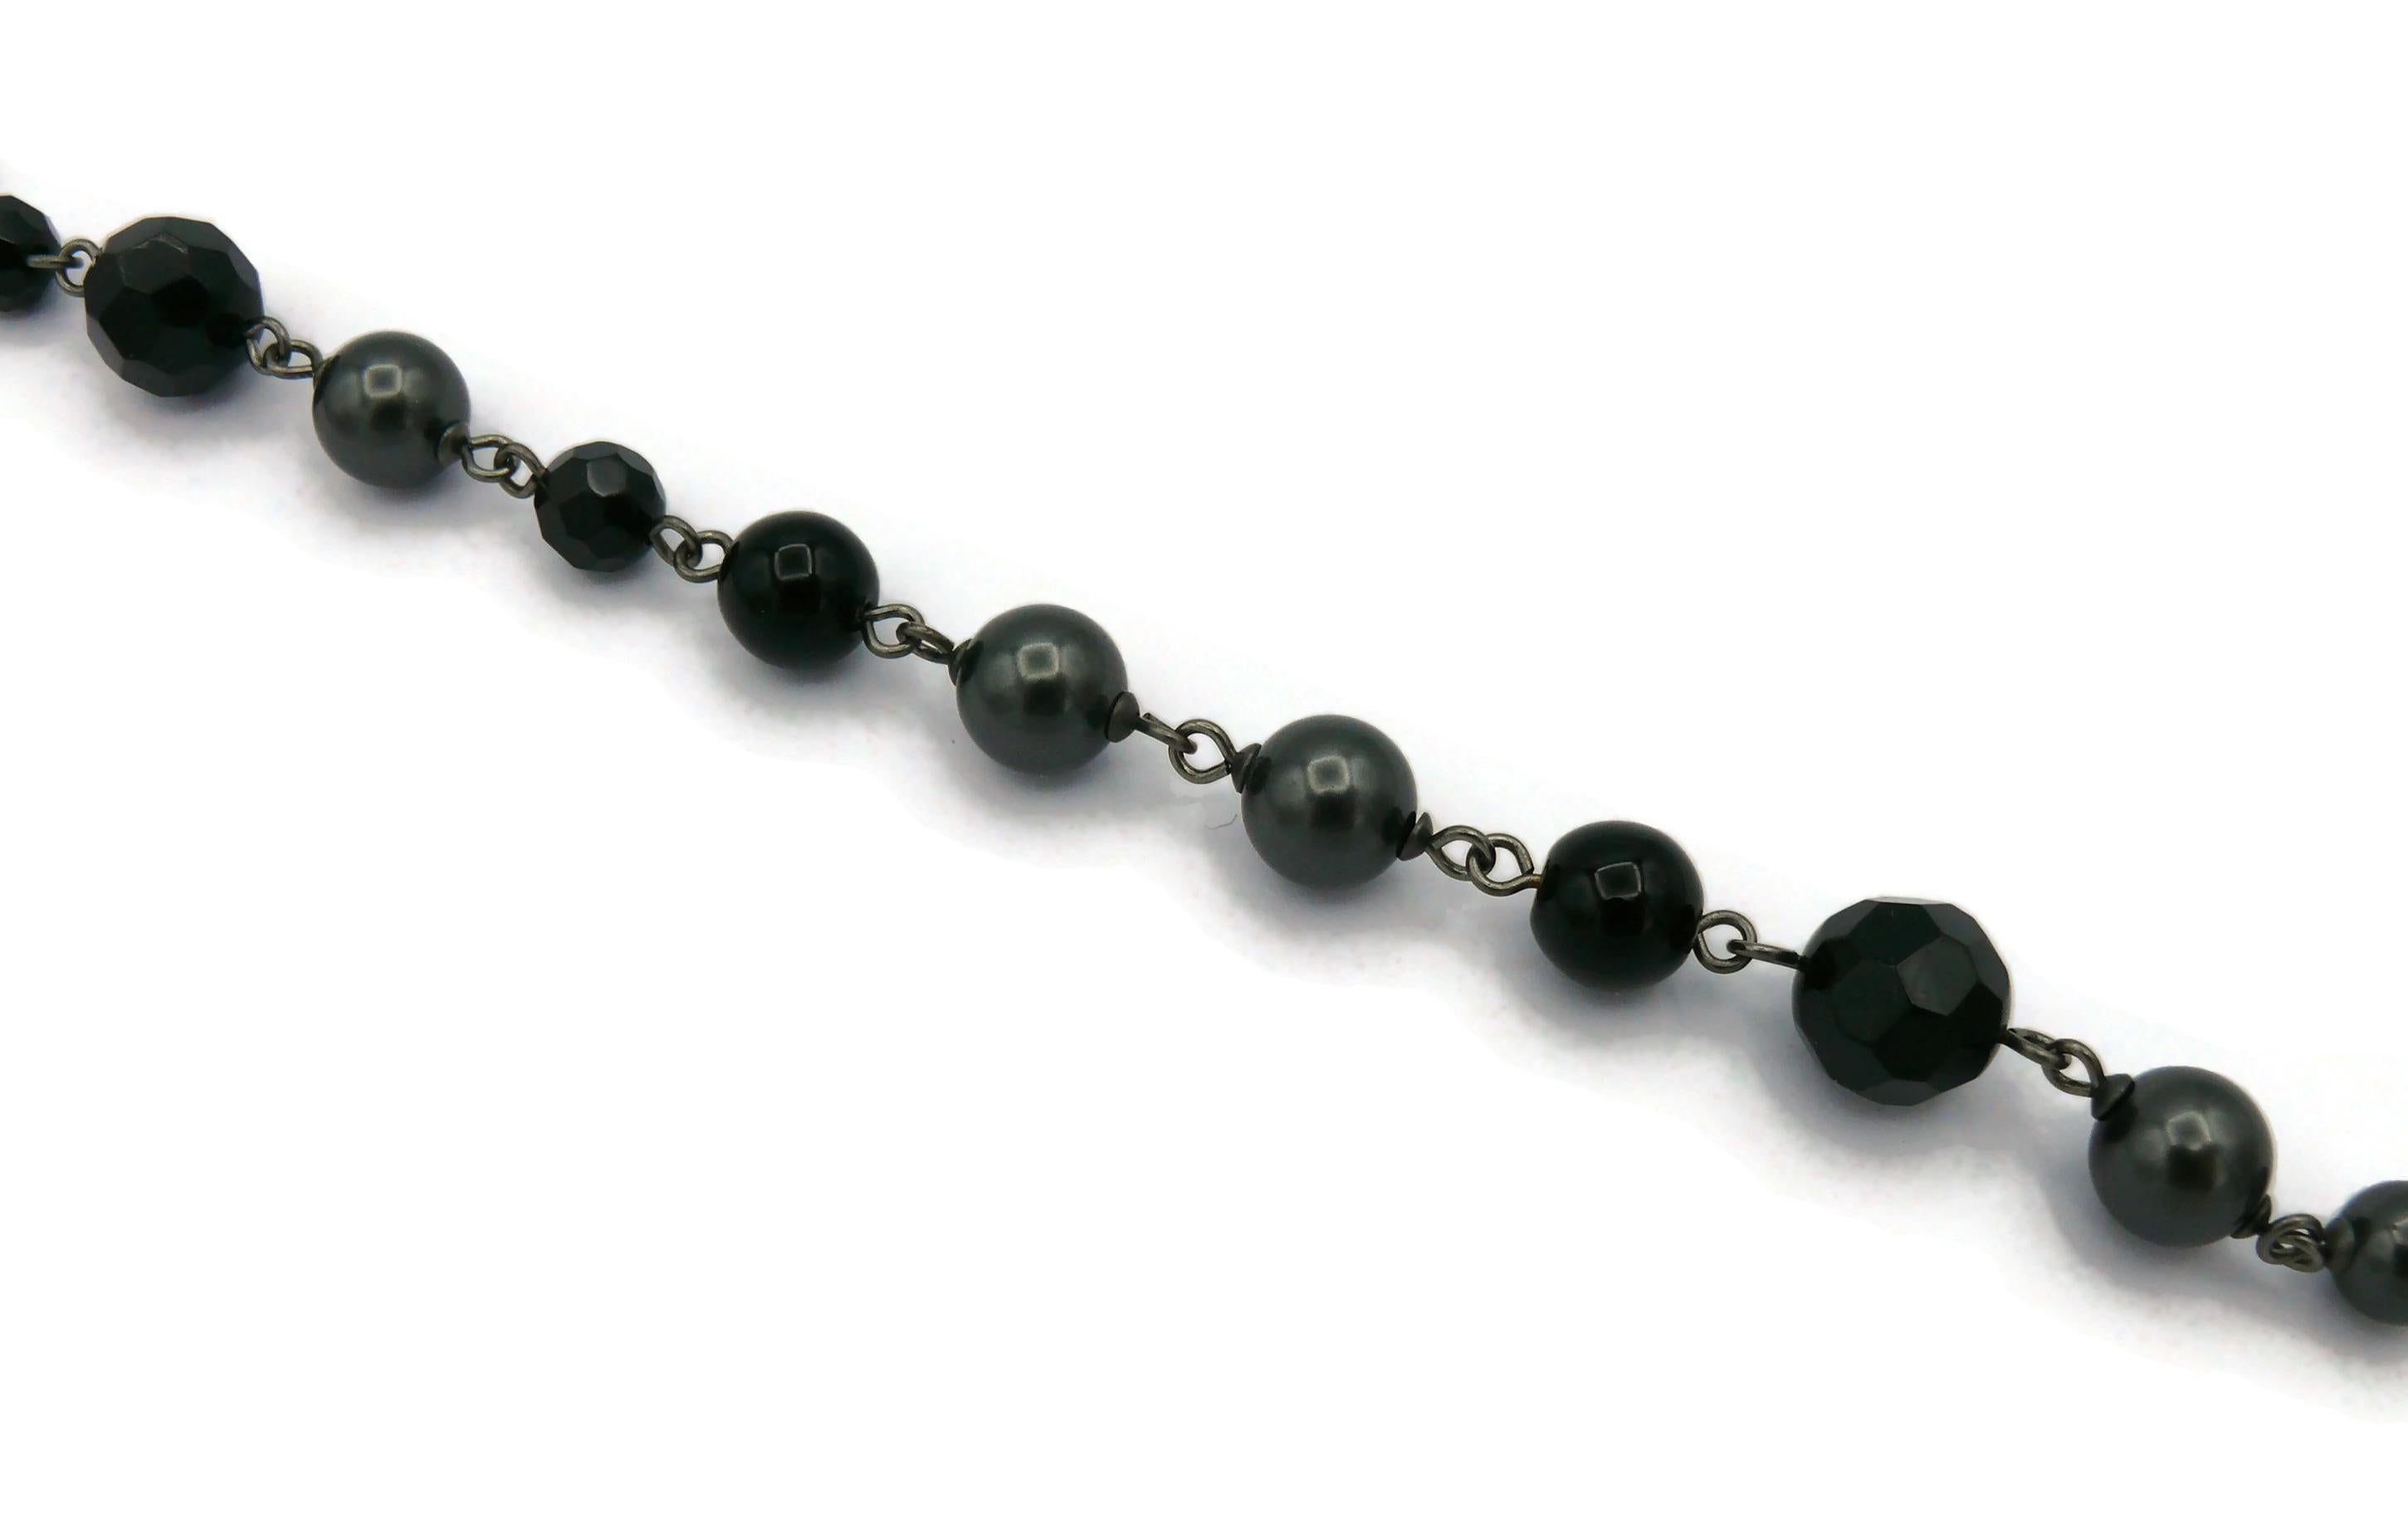 CHANEL by KARL LAGERFELD 2010 Grey Pearl and Black Bead CC Necklace For Sale 4